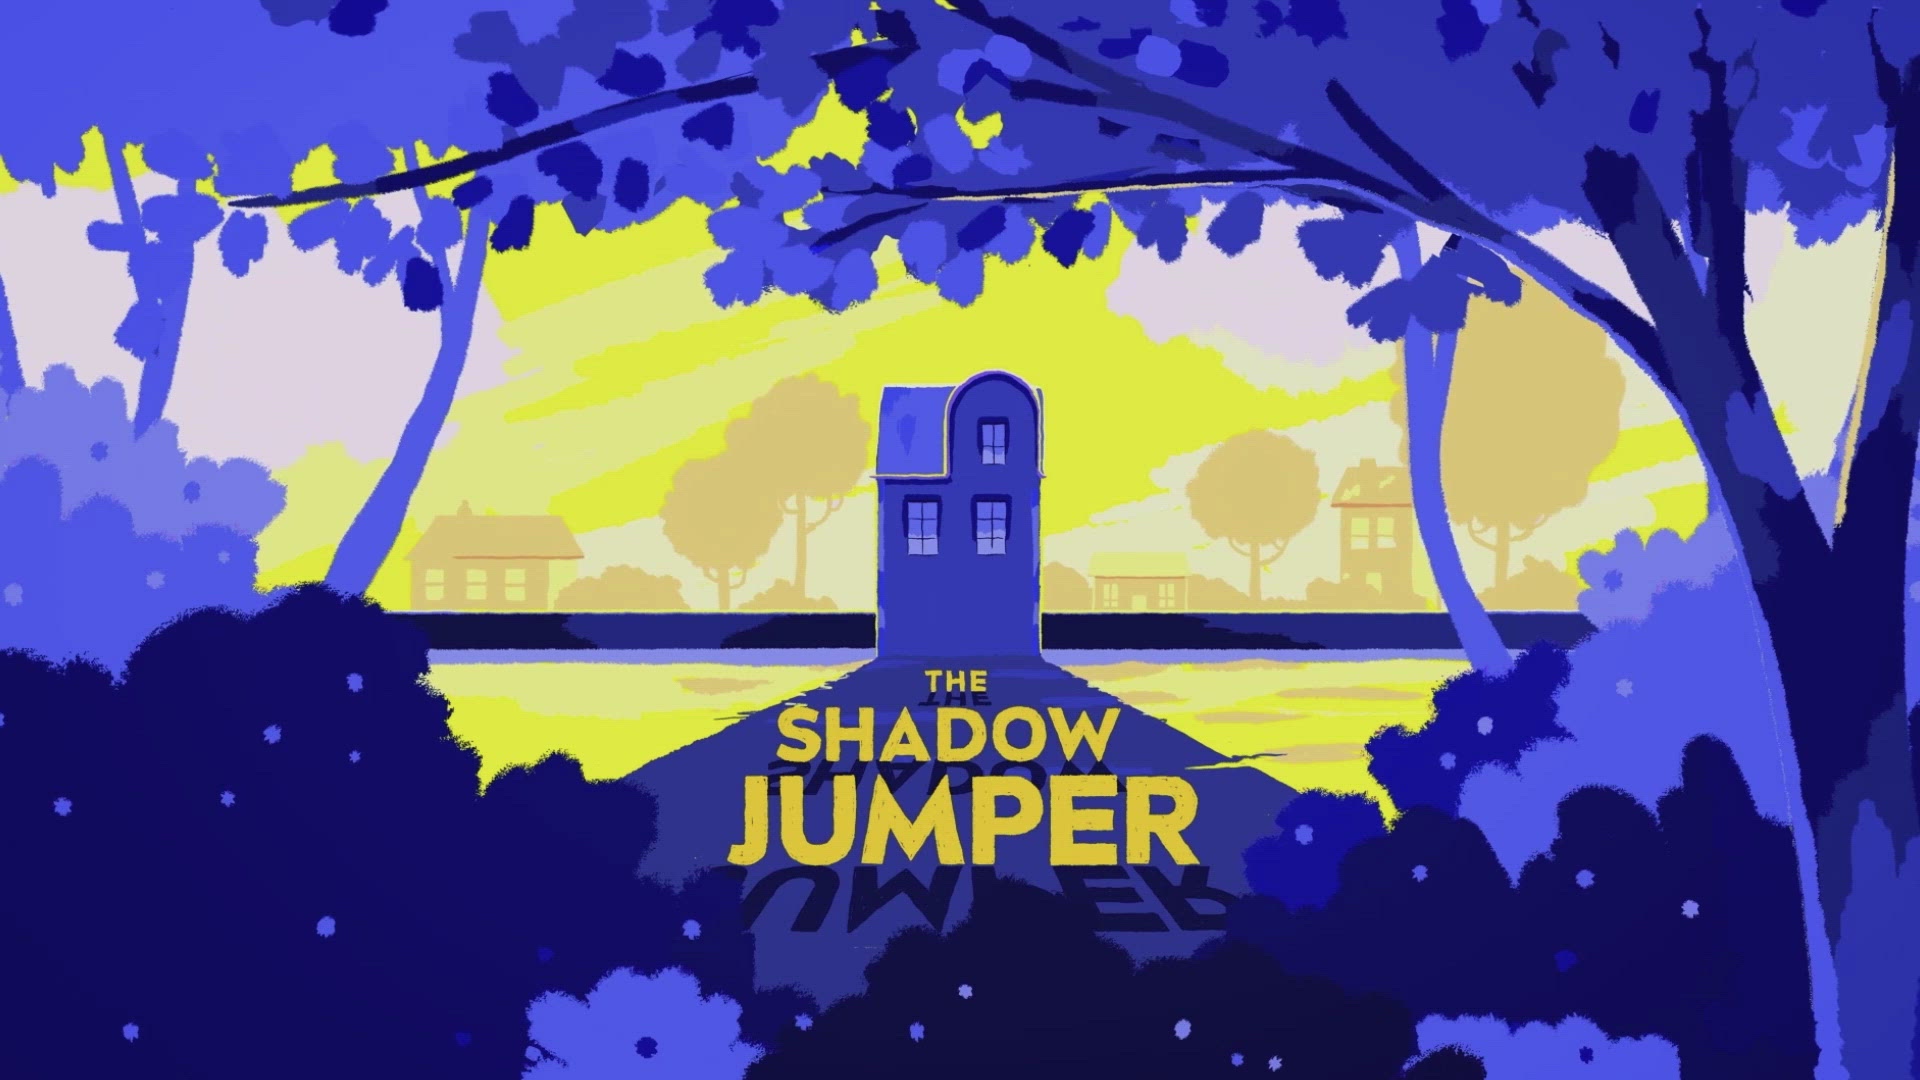 The Shadow Jumper